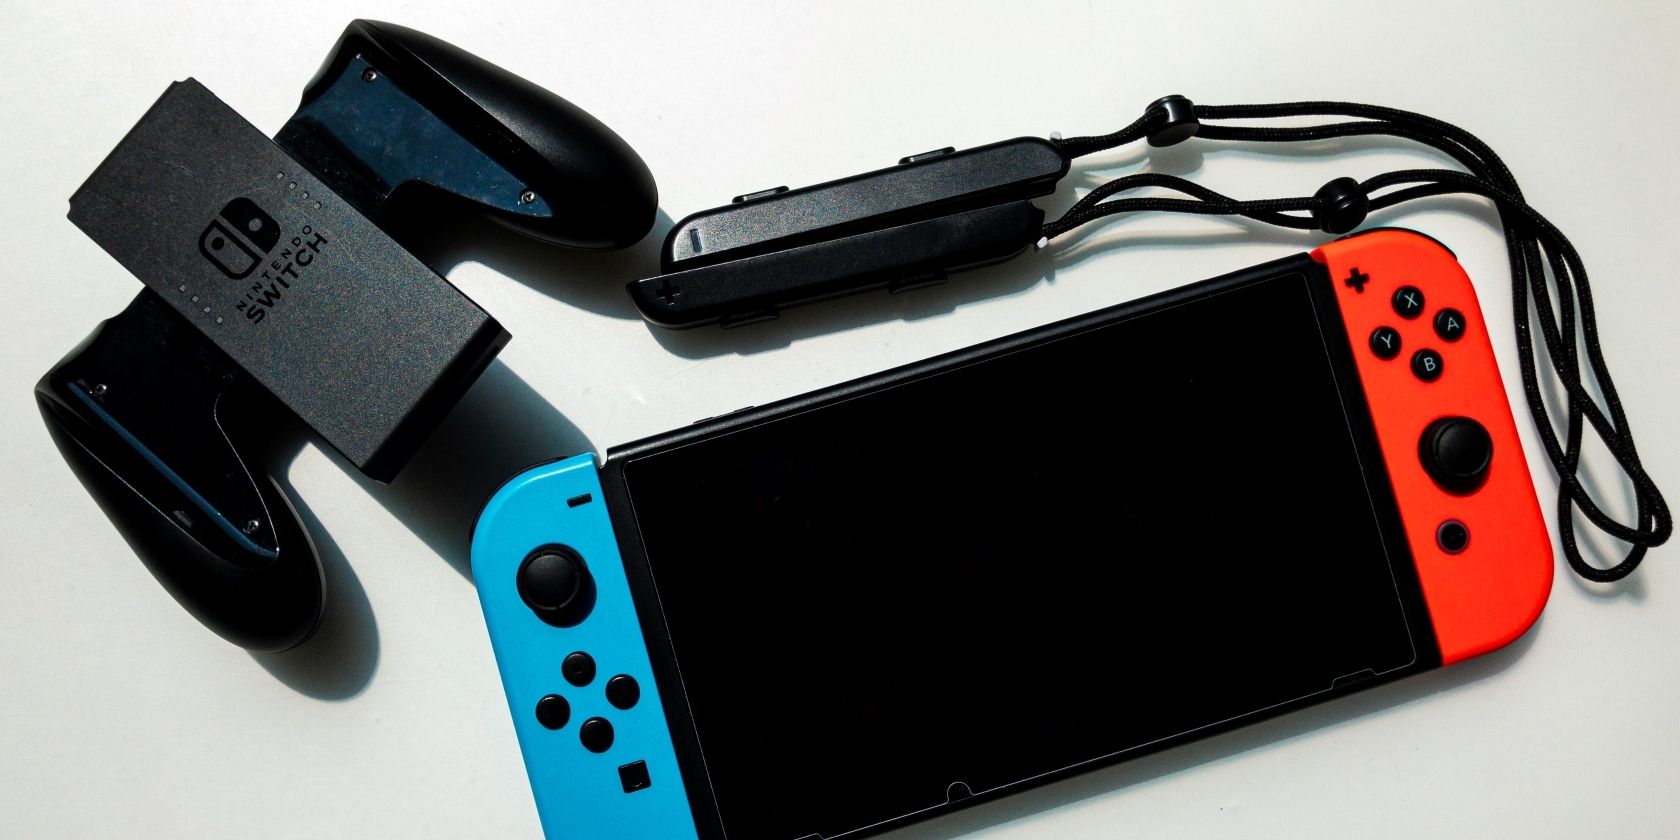 A photograph of a Nintendo Switch with Blue and Red Joy Cons surrounded by accessories